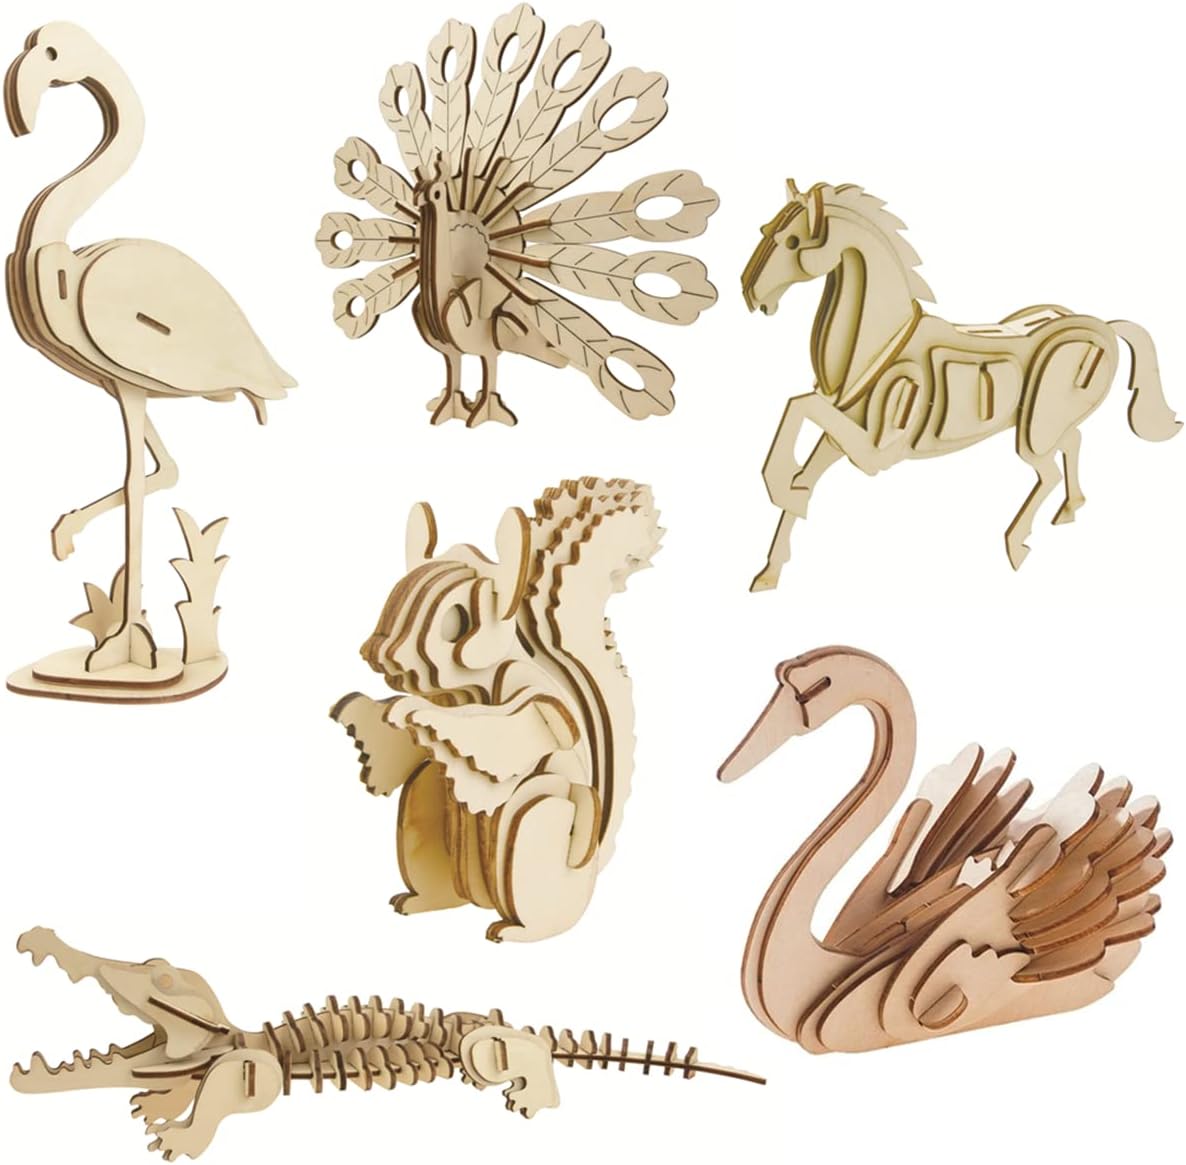 3D Wooden Wild Animal Puzzle - 6 Piece Set Wood Wild Animals Skeleton Assembly Model Kits - Wooden Crafts DIY Brain Teaser Puzzle - STEM Toys Gifts for Kids and Adults Teens Boys Girls